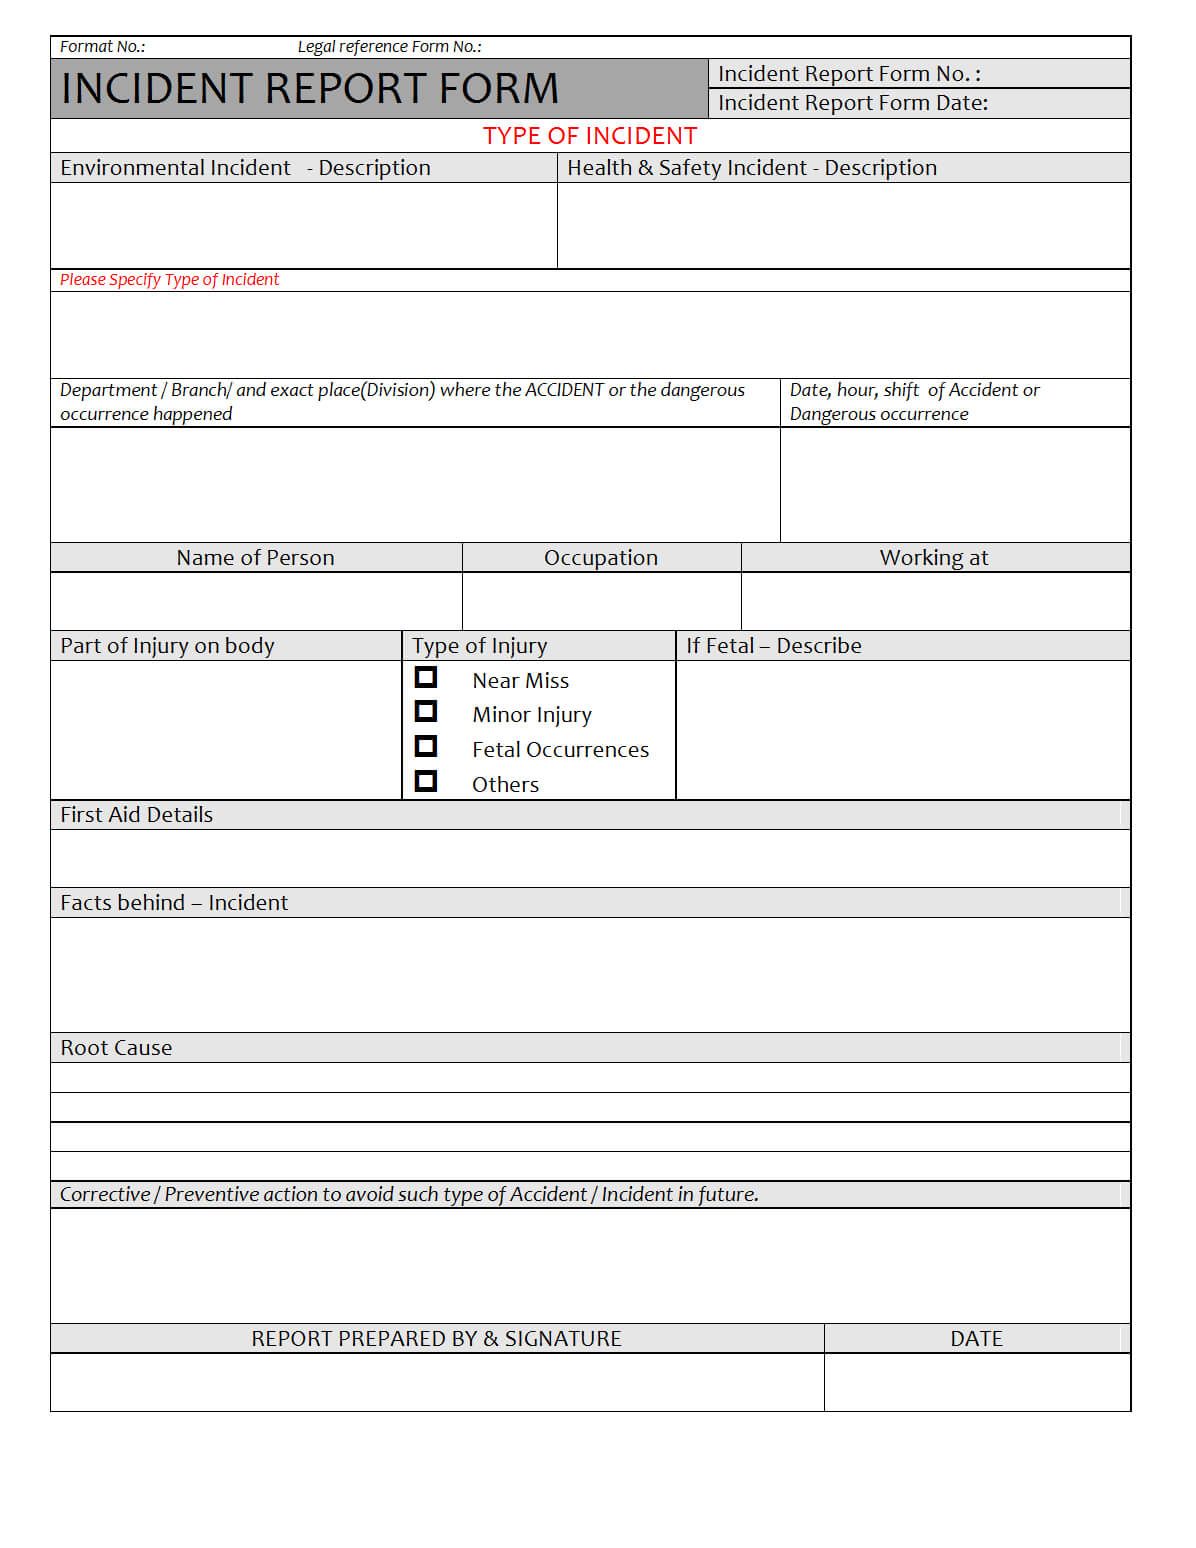 028 Incident Report Form Template Ideas Staggering Workplace With Incident Hazard Report Form Template